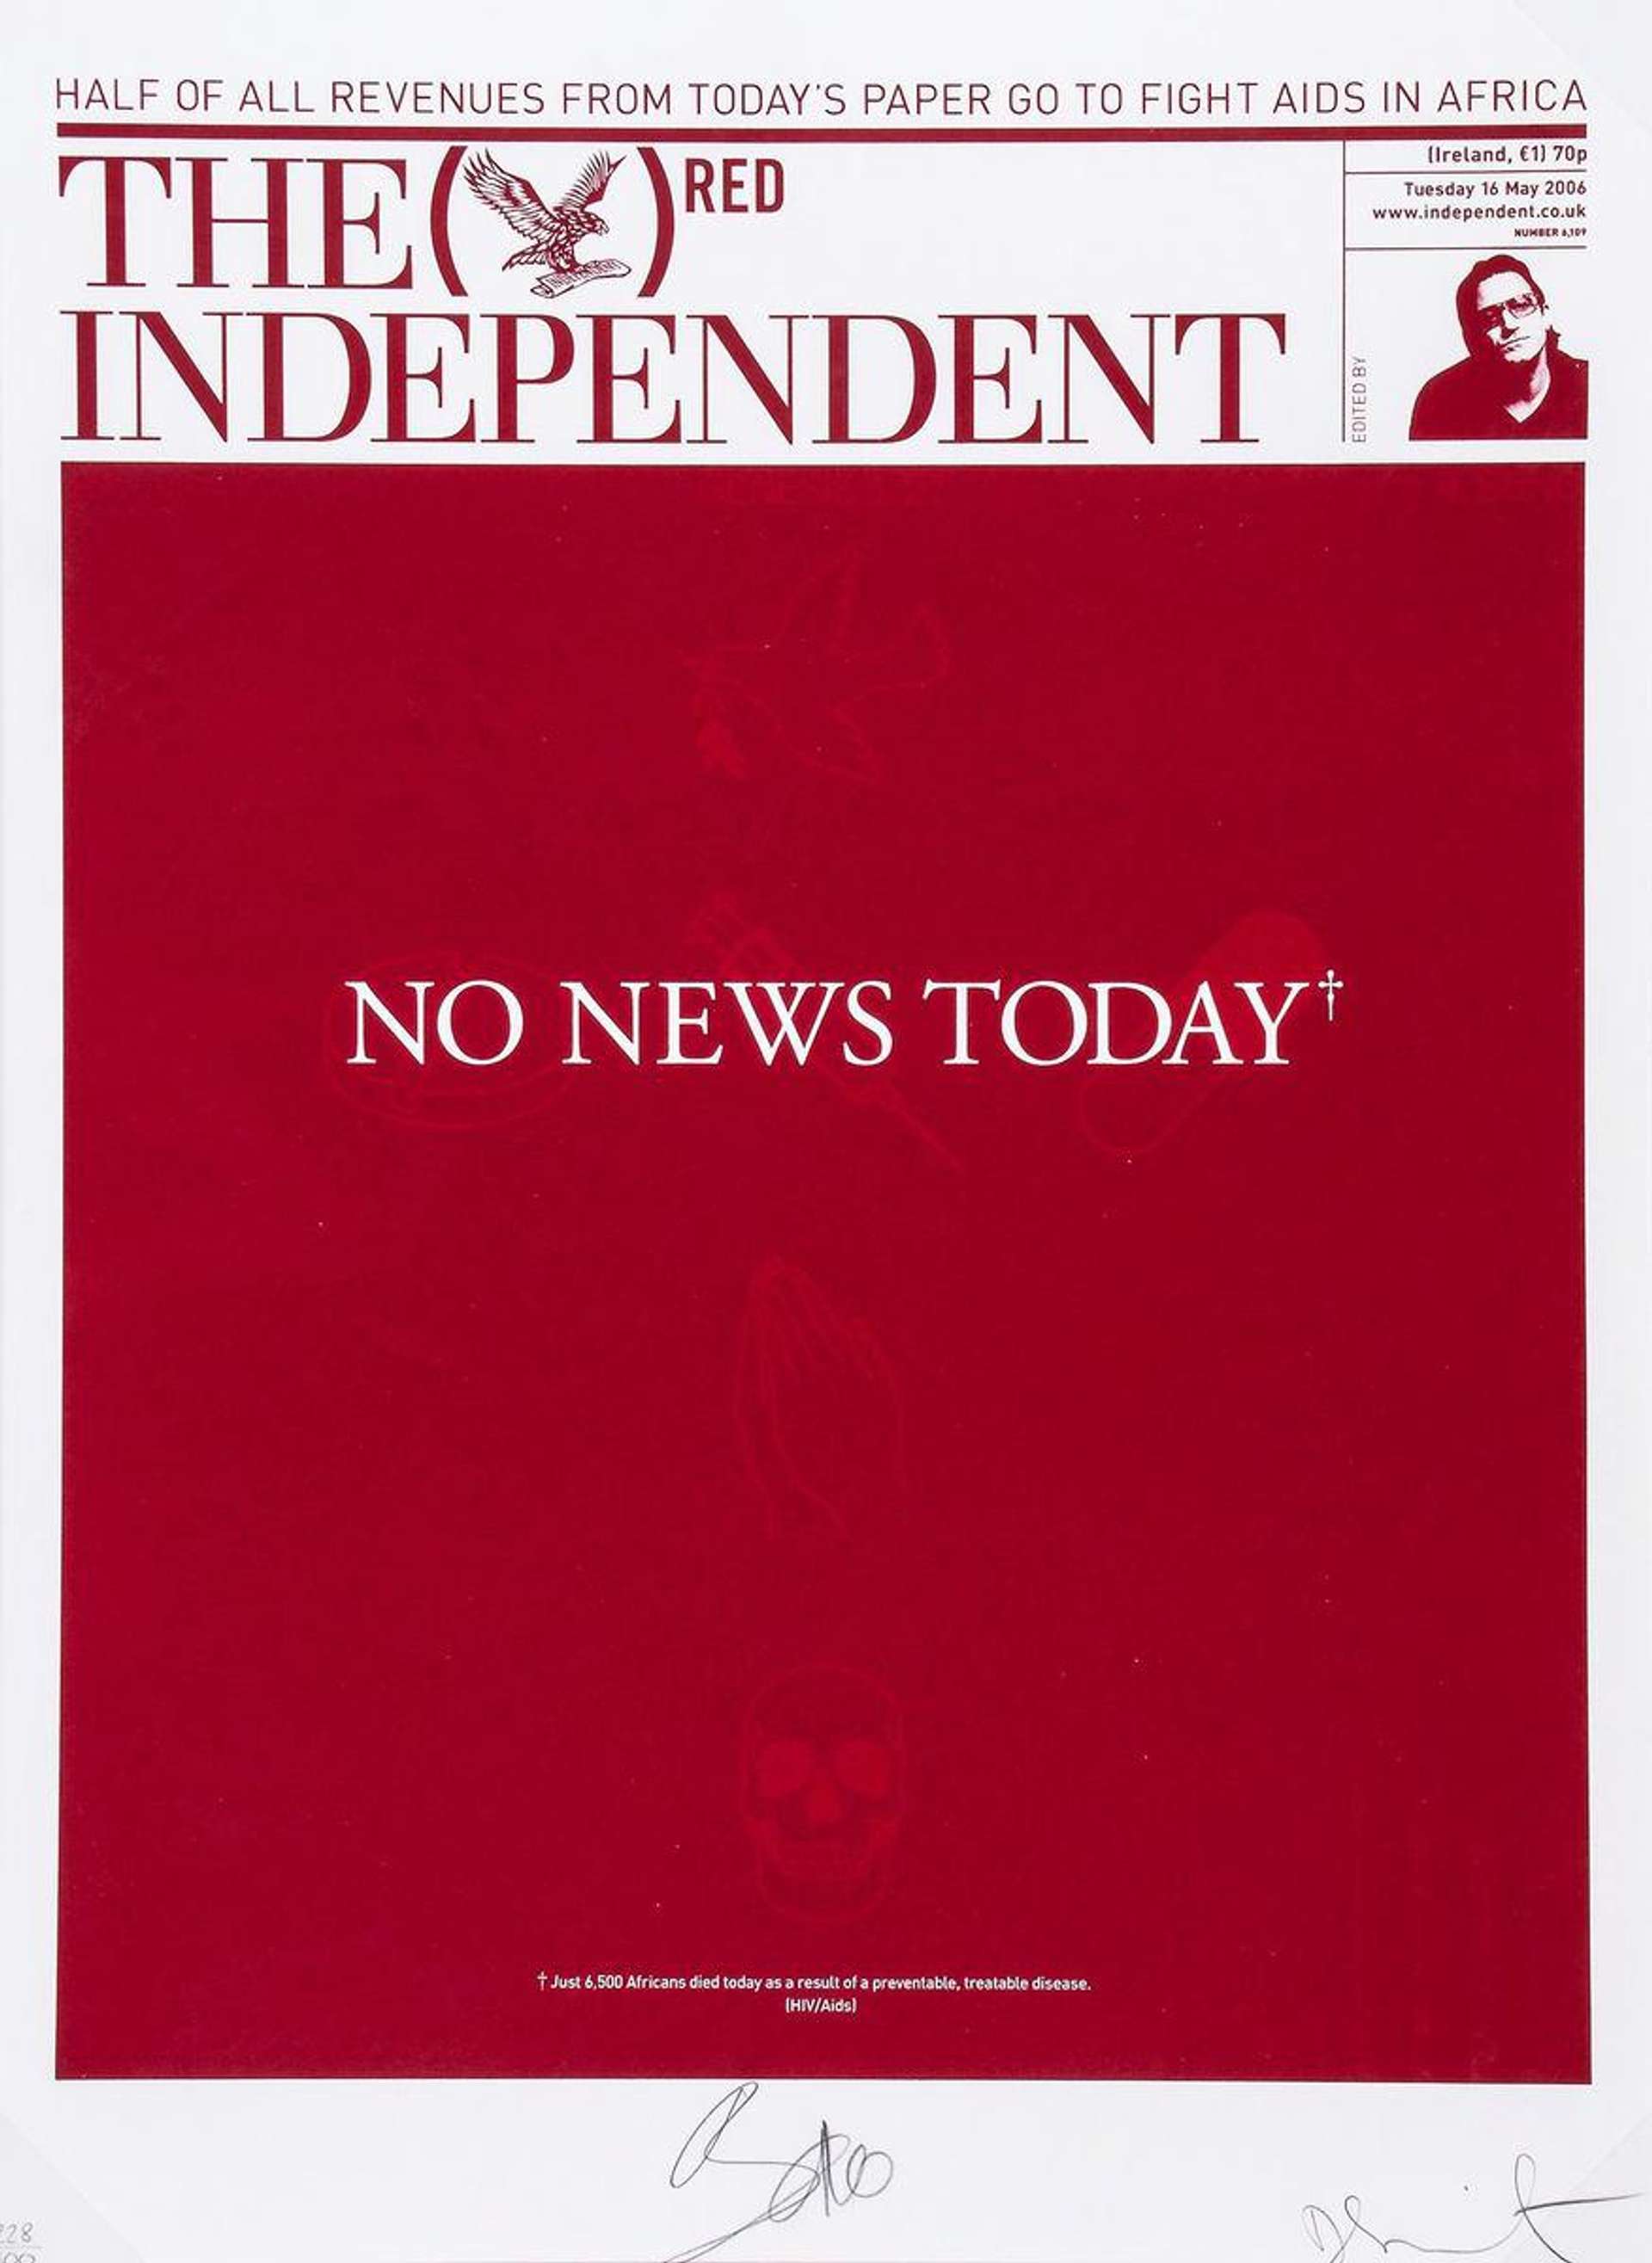 No News Today - Signed Print by Damien Hirst 2008 - MyArtBroker